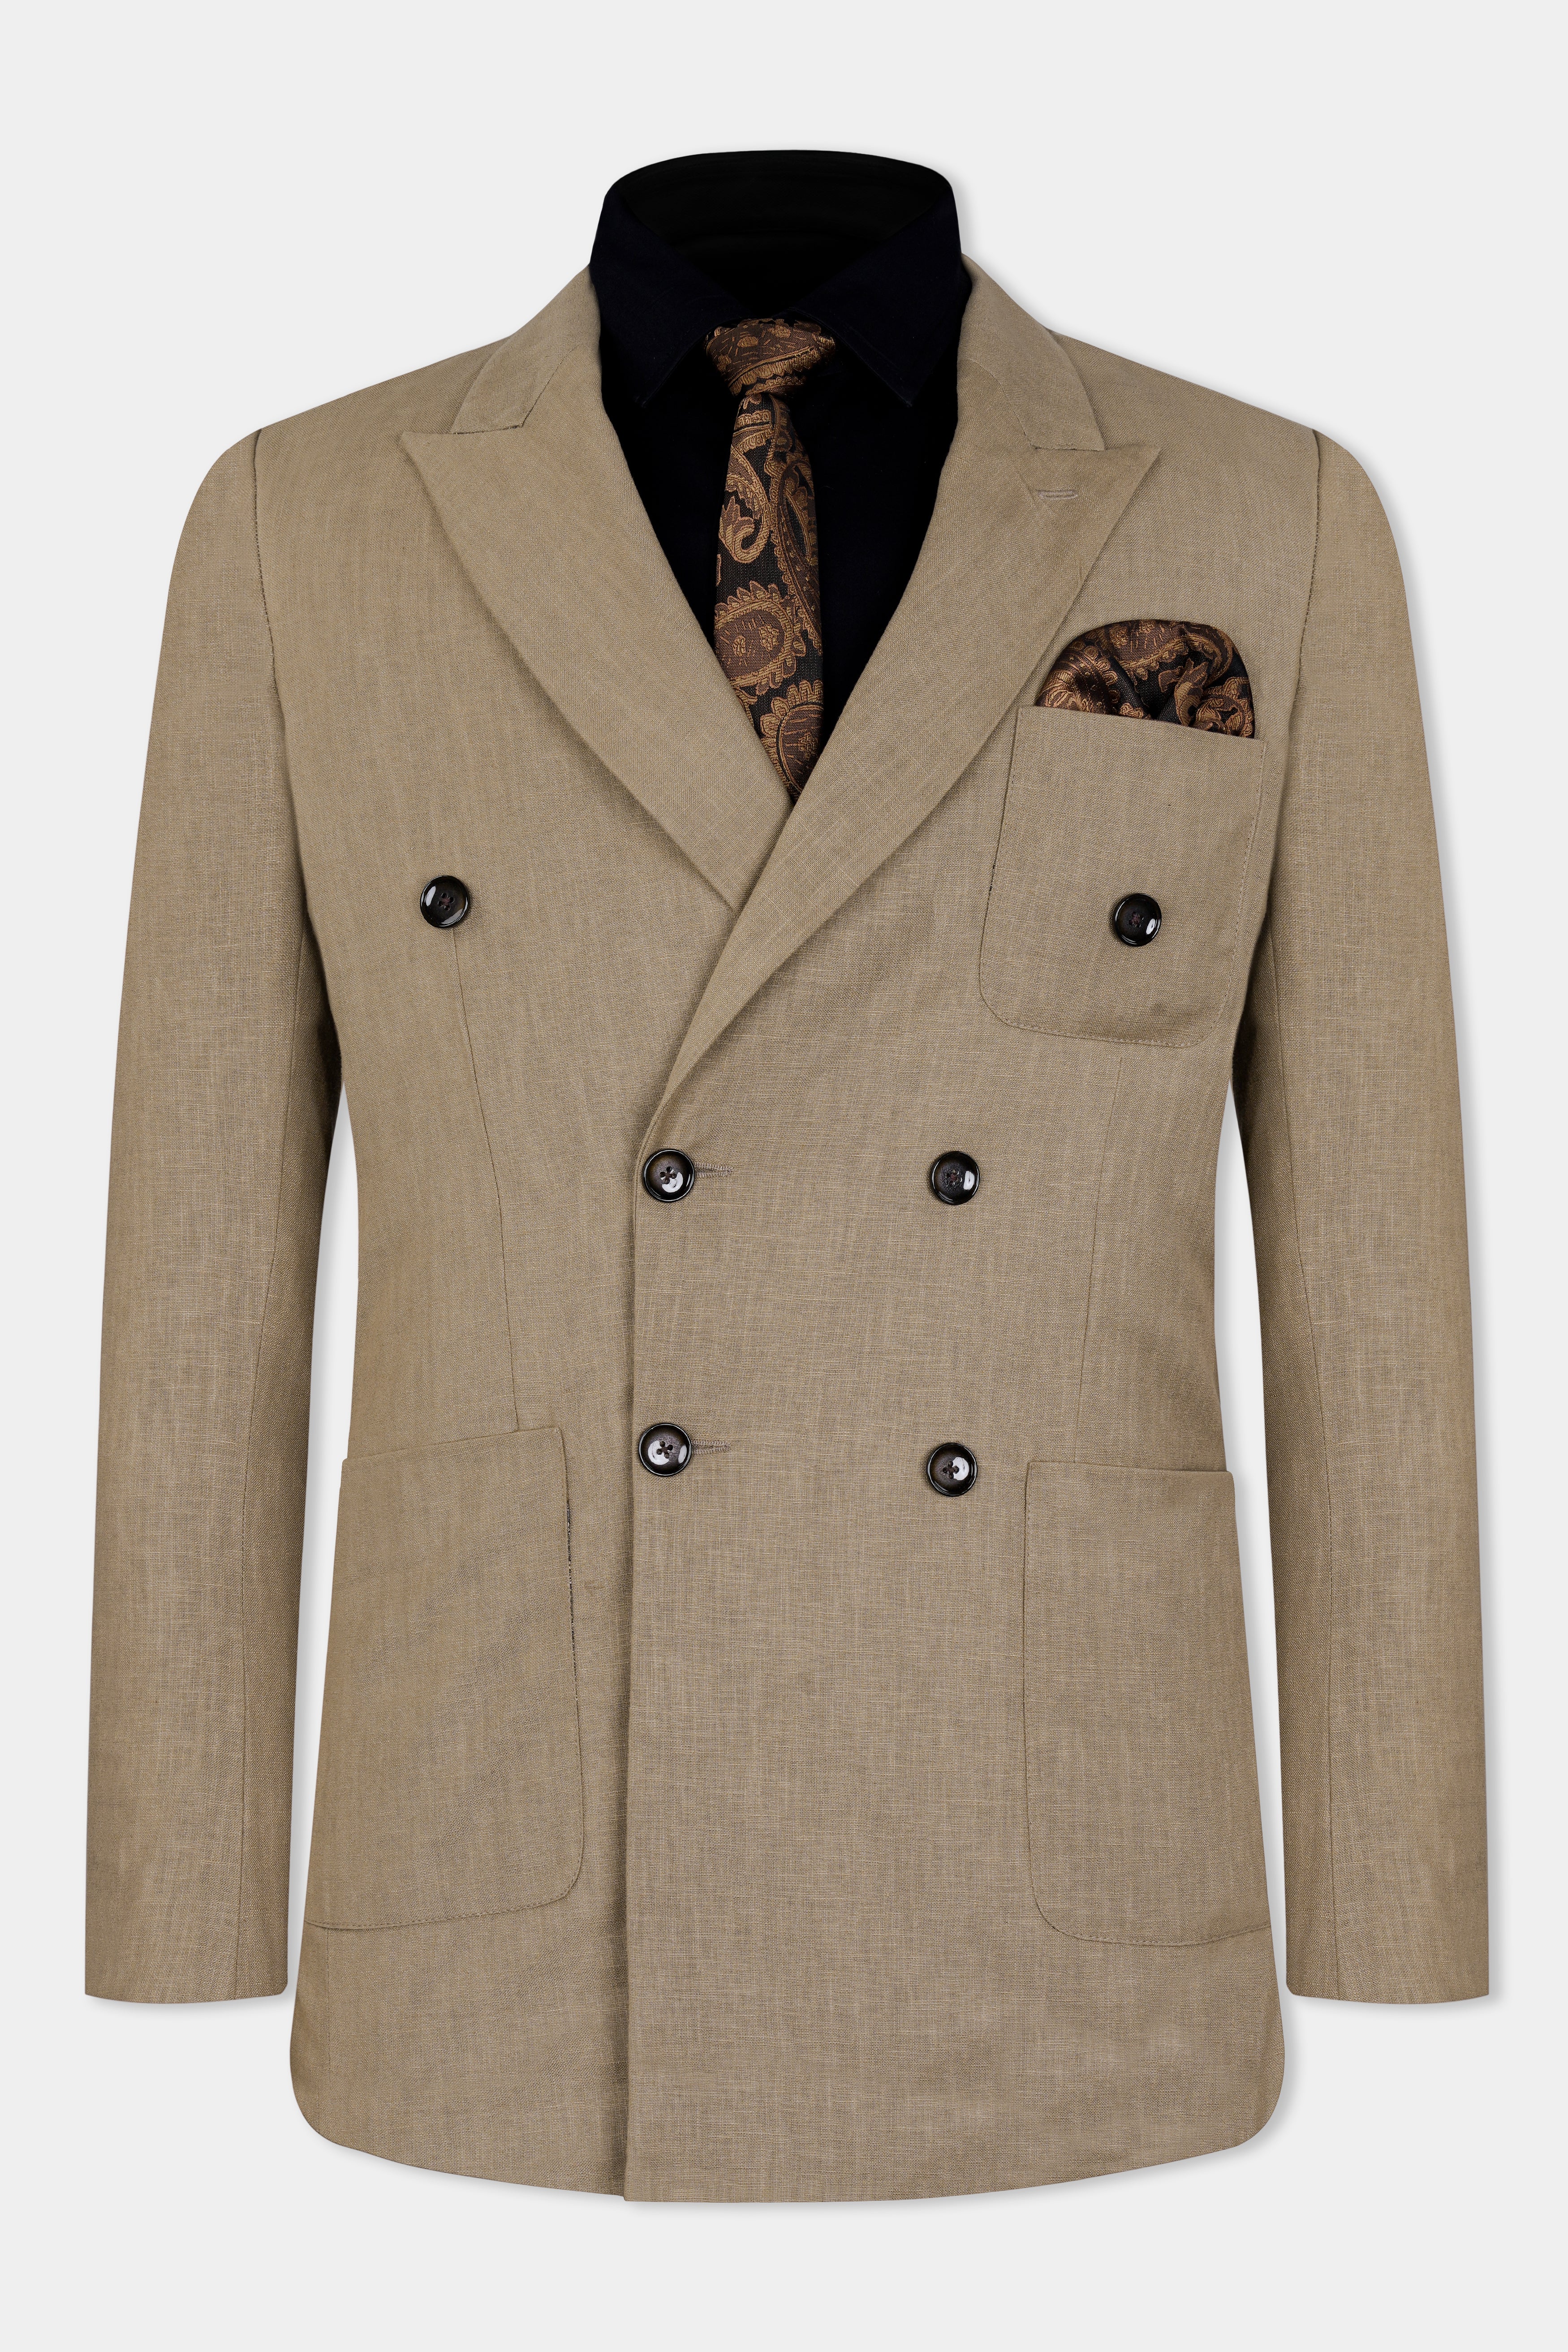 Sandrift Brown Luxurious Linen Double Breasted Sports Blazer BL2926-DB-PP-36, BL2926-DB-PP-38, BL2926-DB-PP-40, BL2926-DB-PP-42, BL2926-DB-PP-44, BL2926-DB-PP-46, BL2926-DB-PP-48, BL2926-DB-PP-50, BL2926-DB-PP-52, BL2926-DB-PP-54, BL2926-DB-PP-56, BL2926-DB-PP-58, BL2926-DB-PP-60